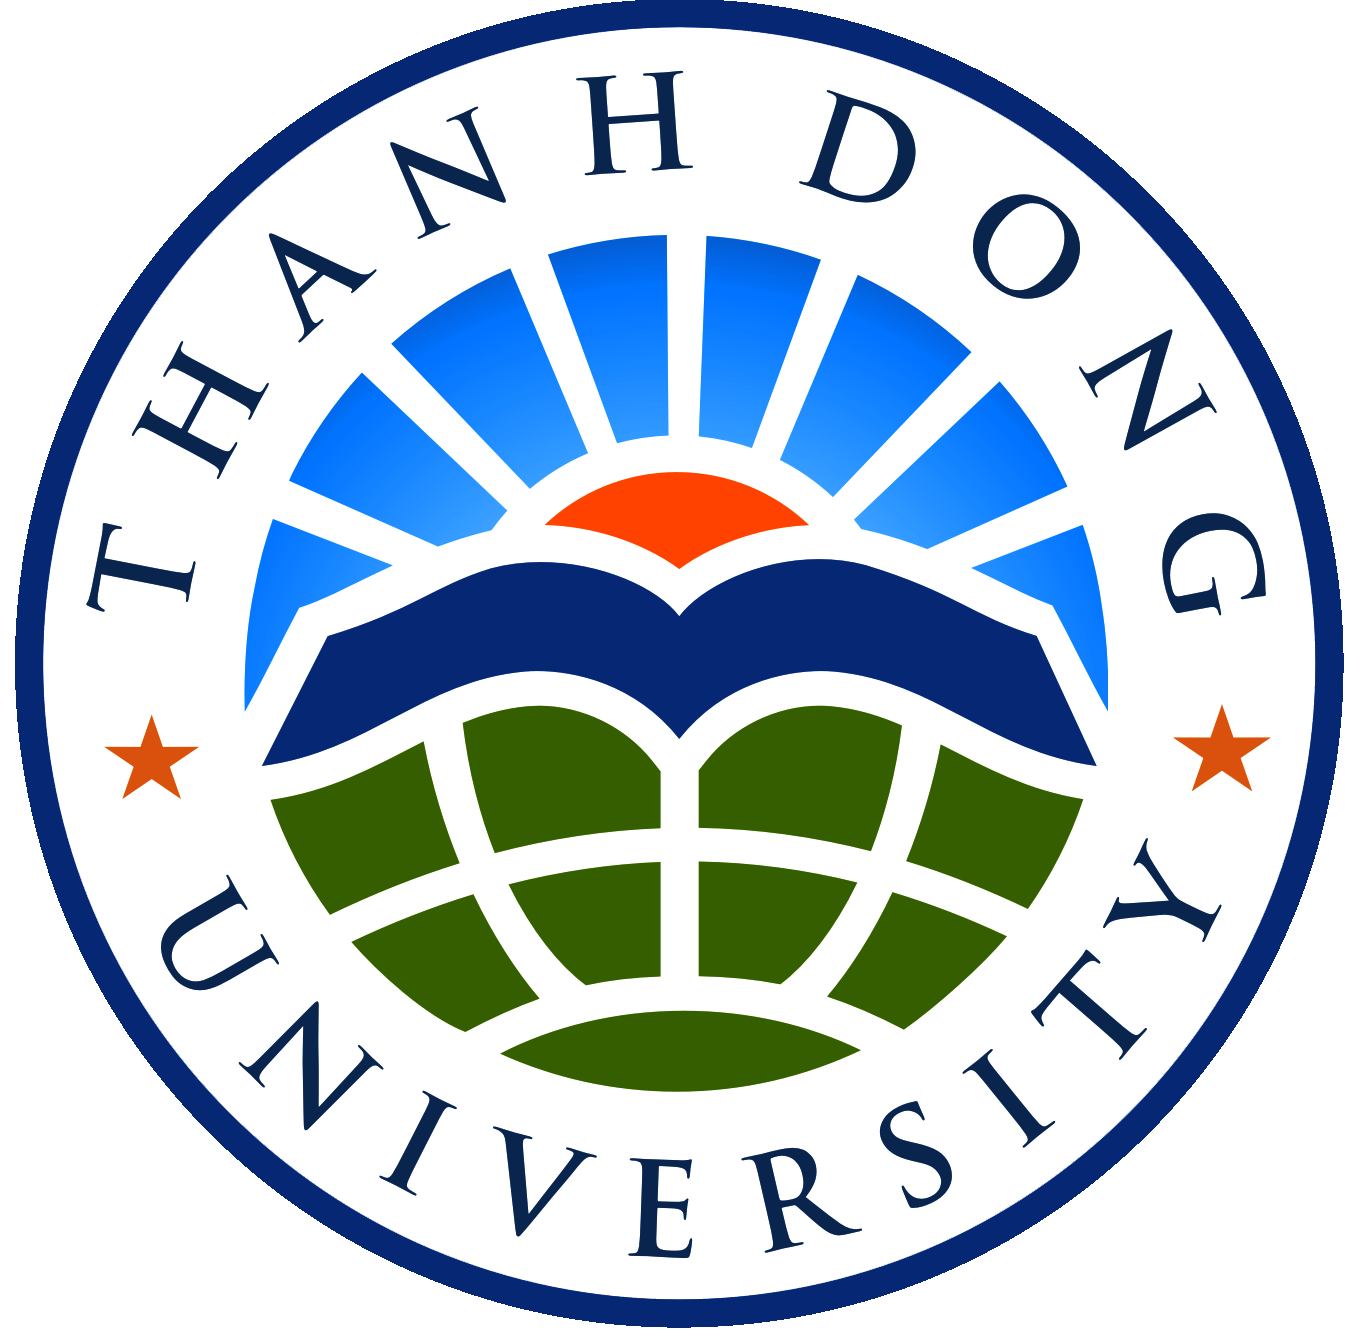 THANH DONG